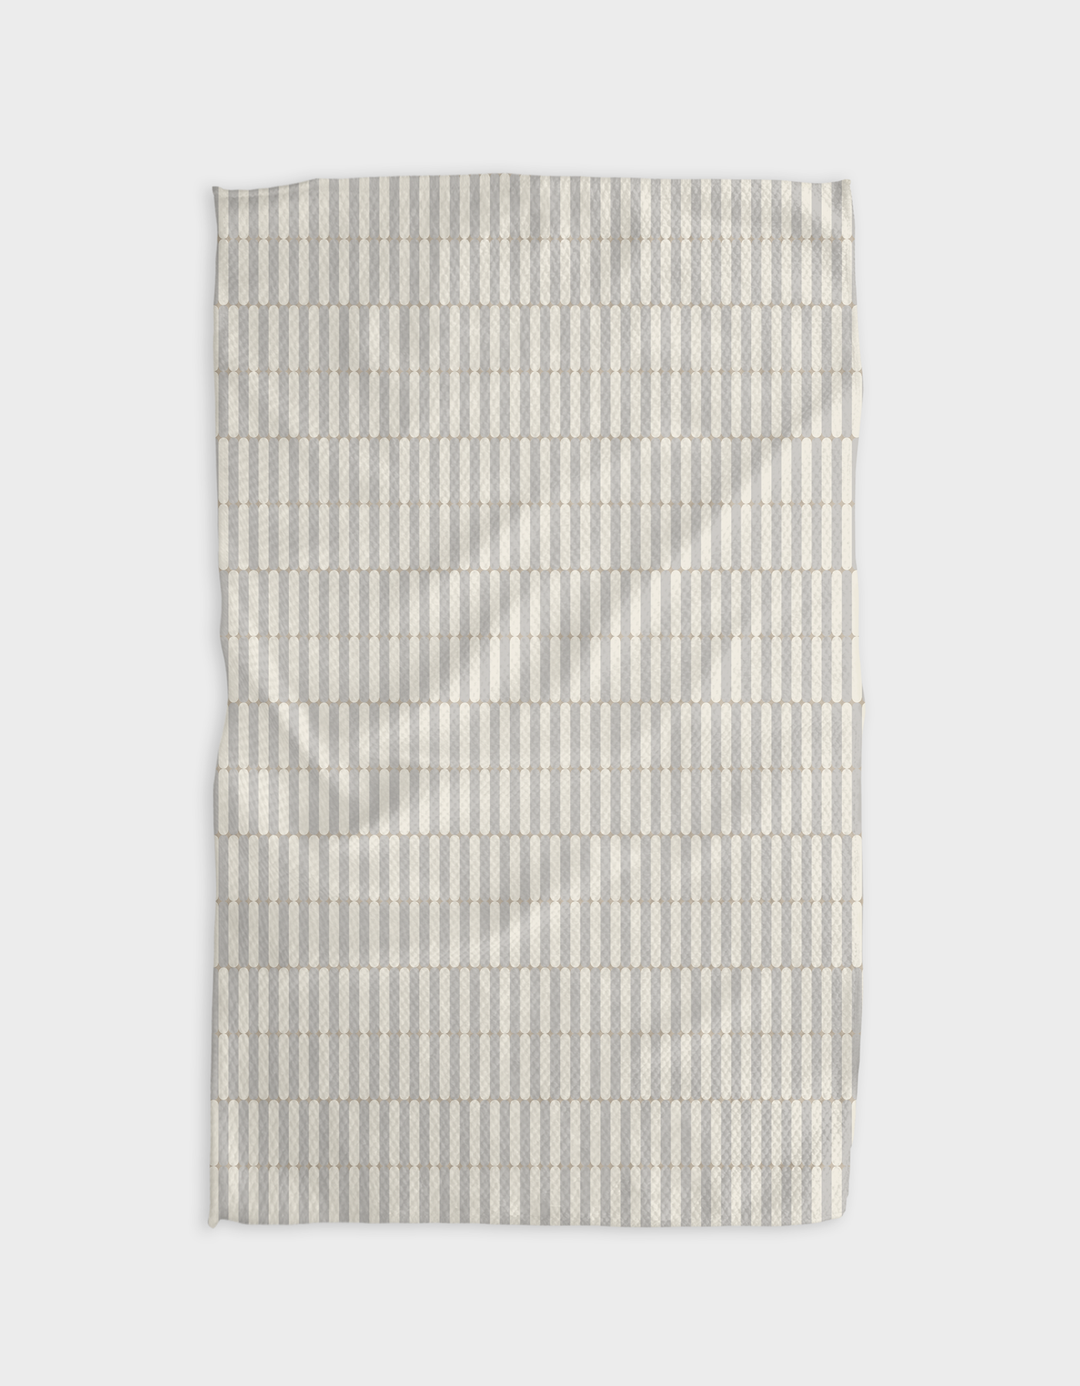 GEOMETRY Kitchen Tea Towel - Quick Dry Microfiber Cloth Dish Towels for  Kitchen Drying - Premium Quick Dry Towel - Reeds Printed + Forward (Pale